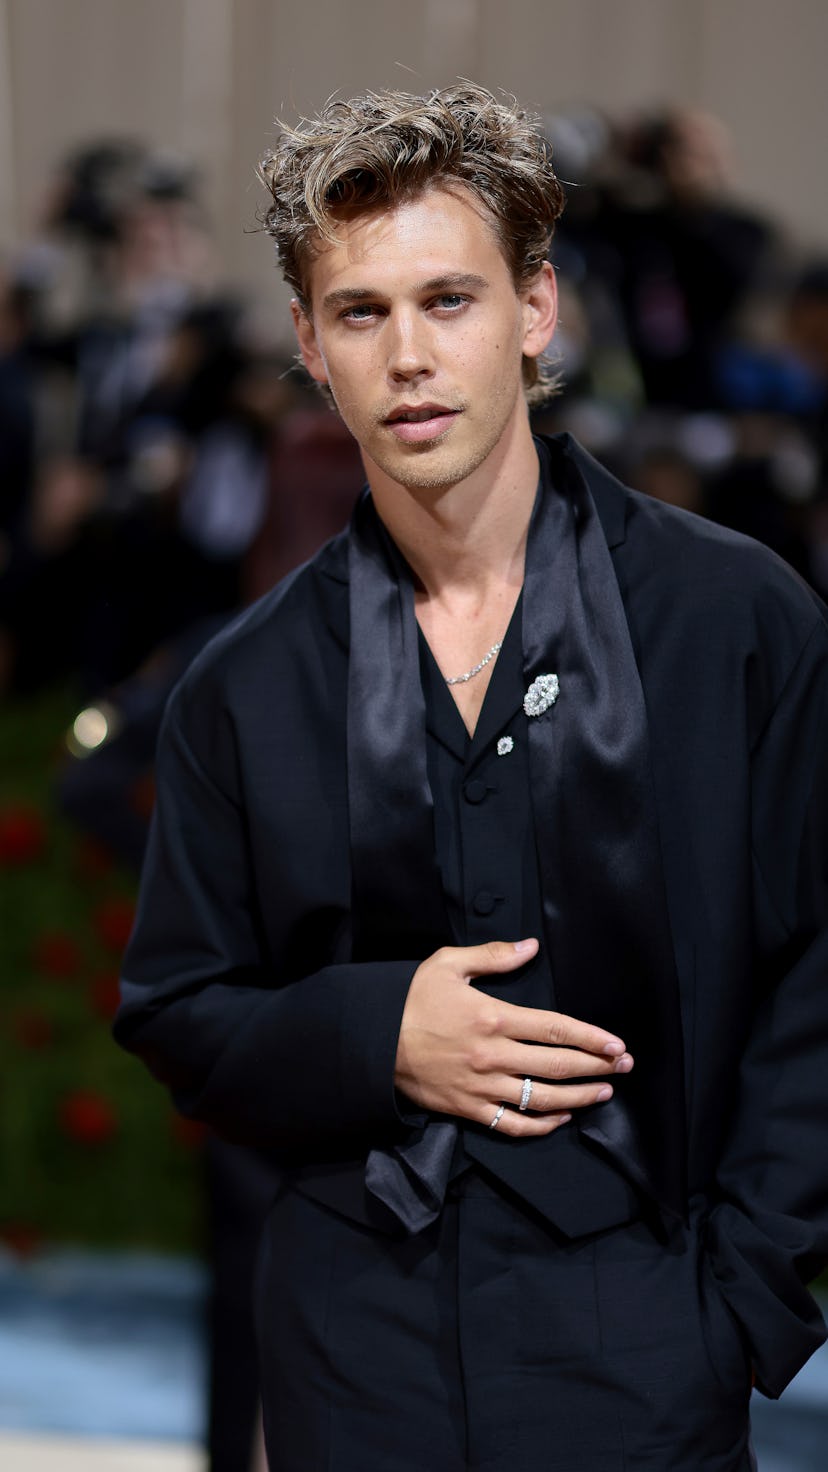 NEW YORK, NEW YORK - MAY 02: Austin Butler attends The 2022 Met Gala Celebrating "In America: An Ant...